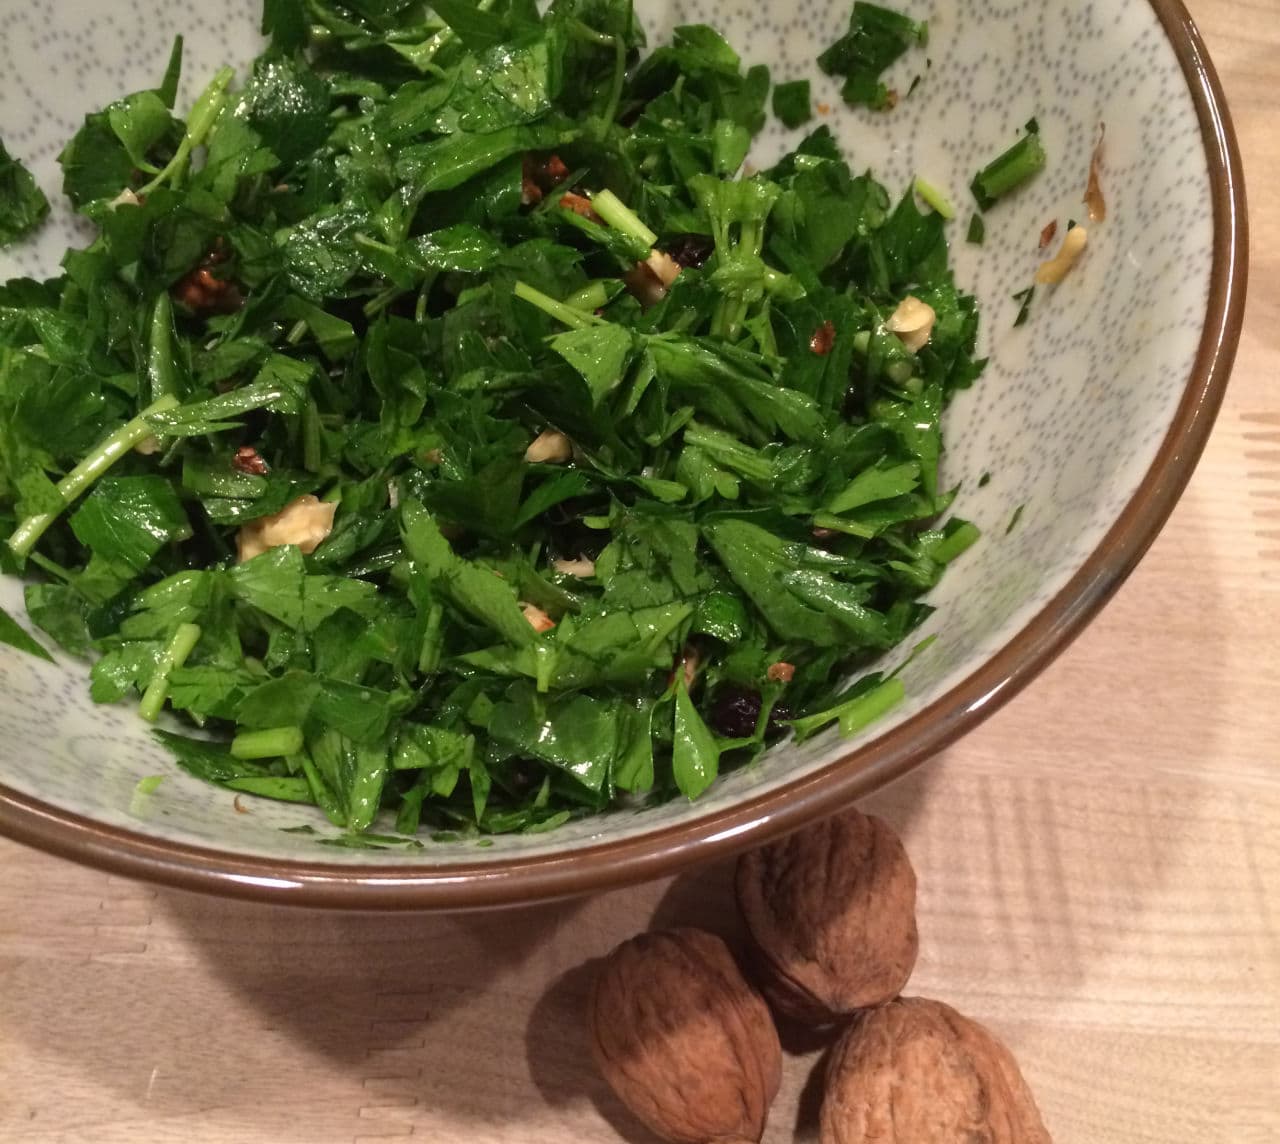 John’s Parsley Salad with Walnuts and Raisins can be served for lunch or dinner (Kathy Gunst)